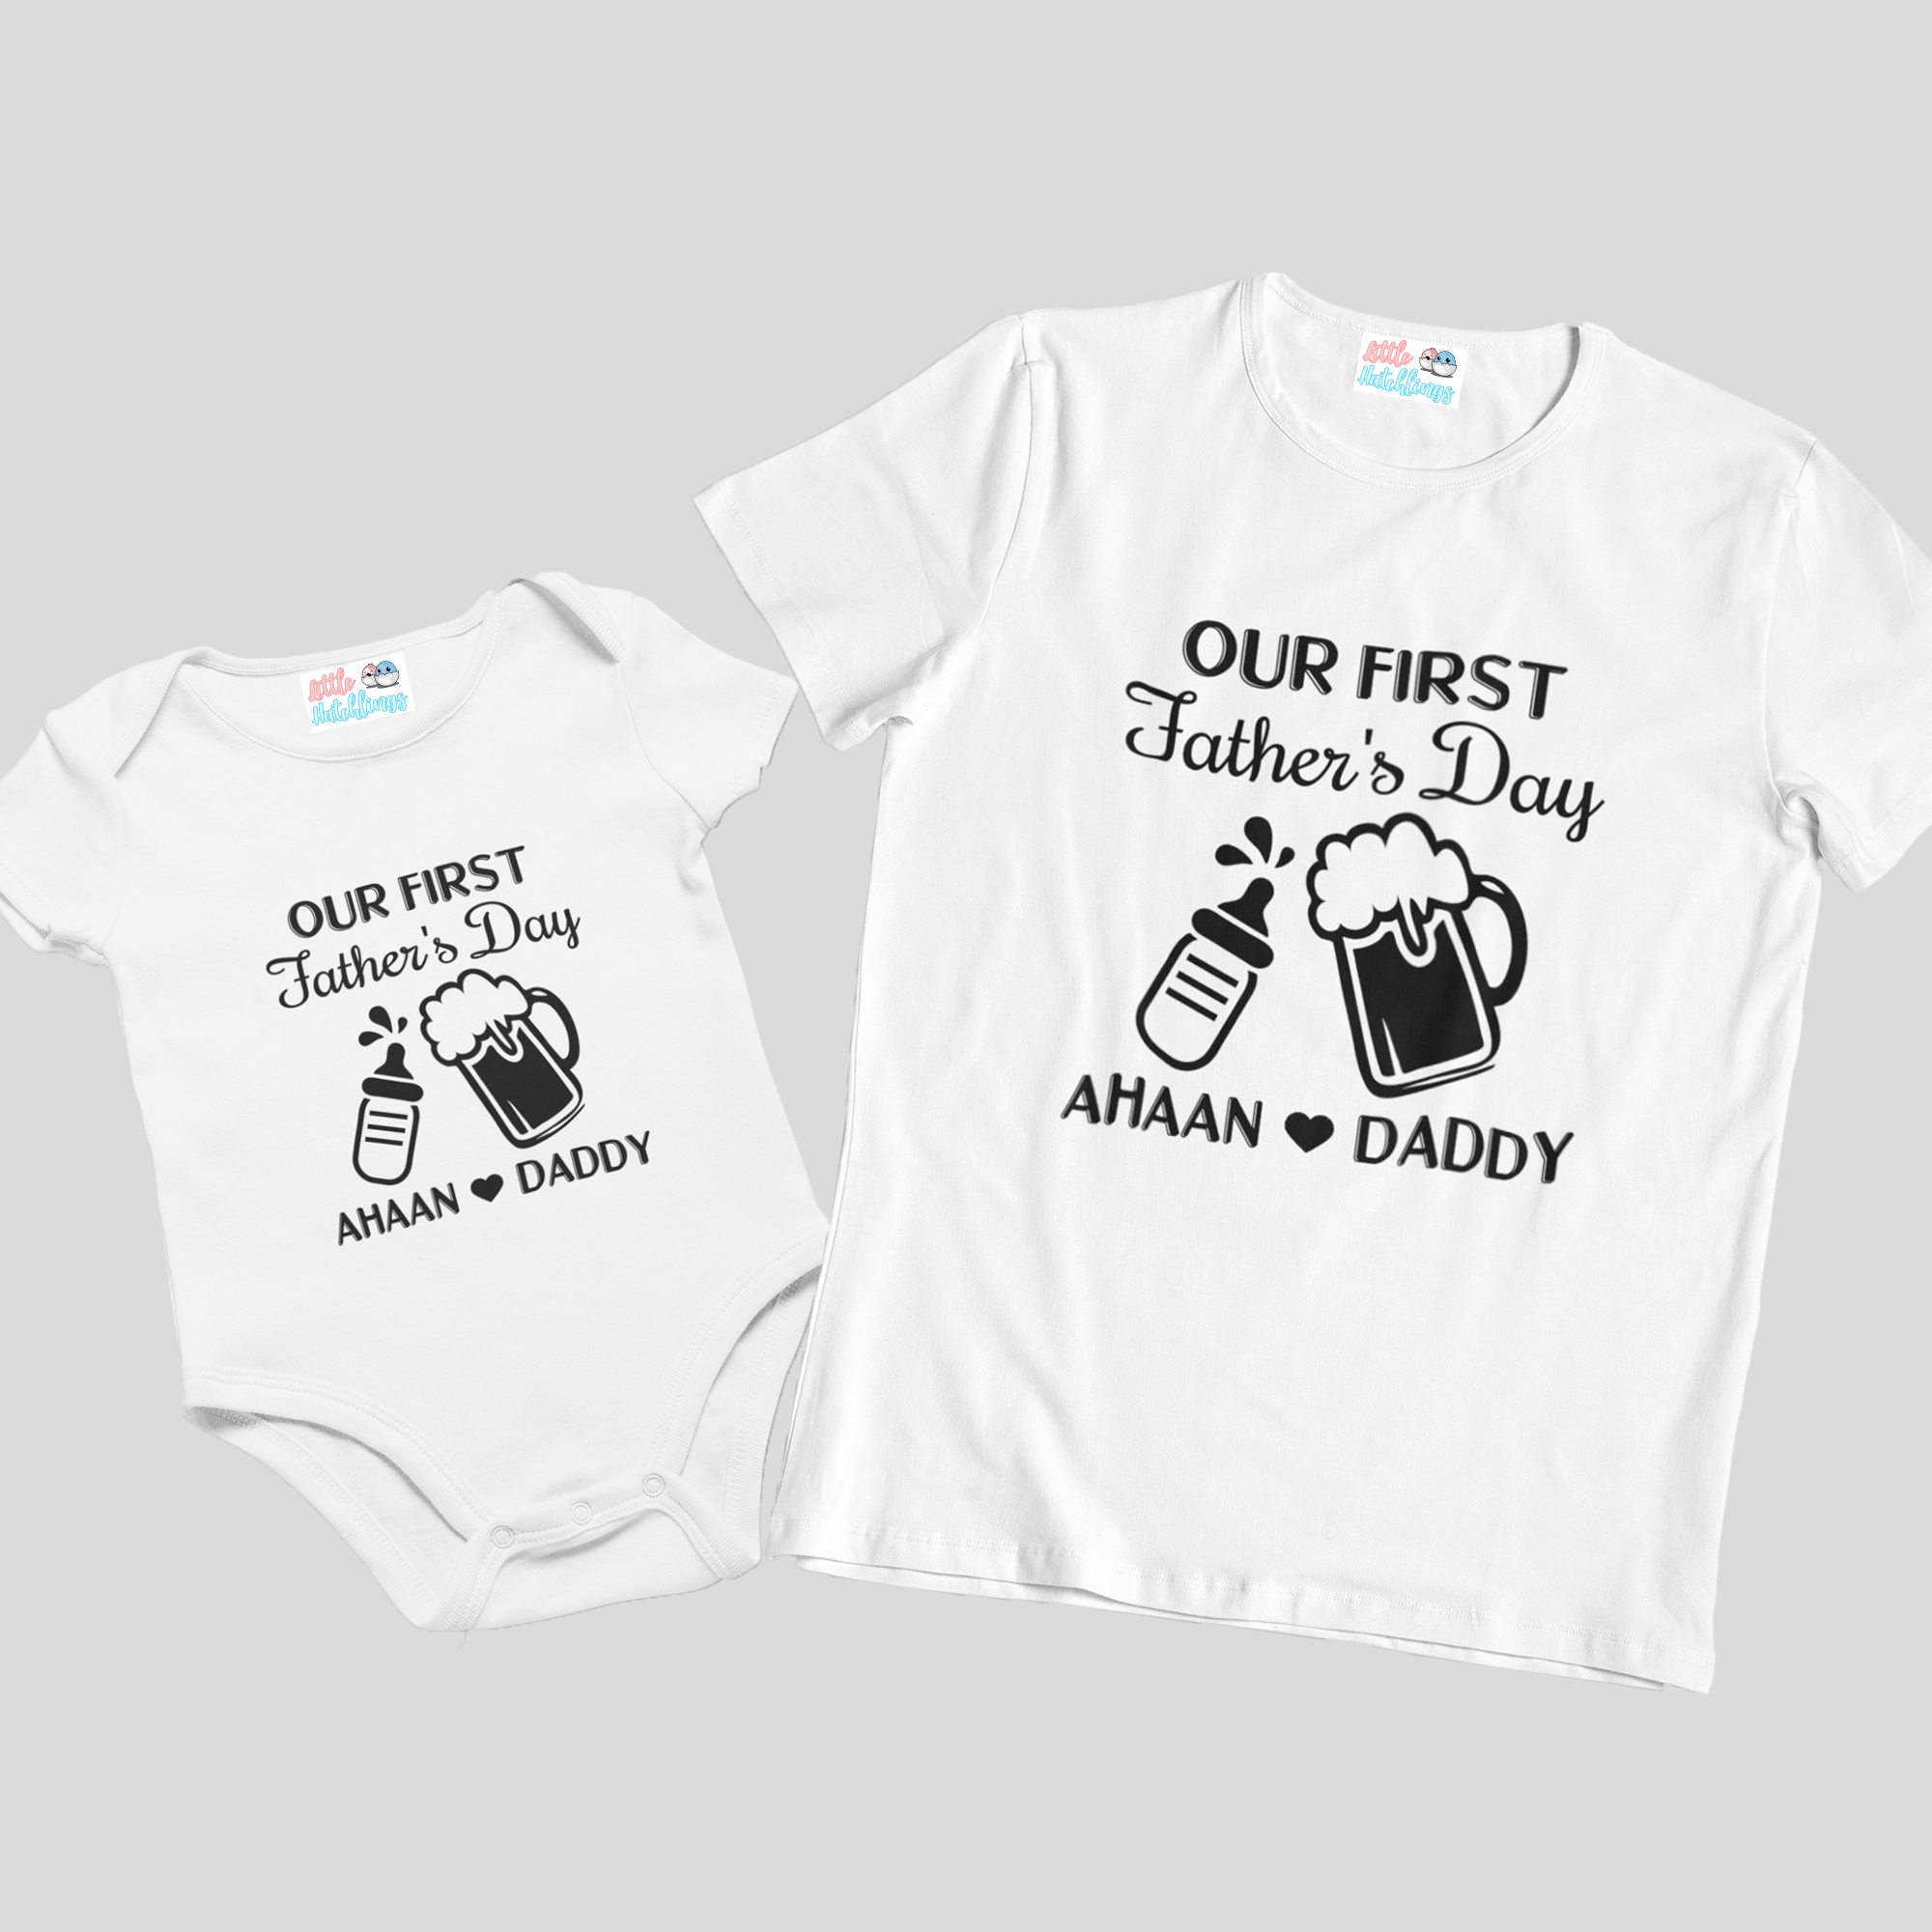 First Fathers Day Bottle Beer Mug White Combo - Adult Tshirt + Kids Tshirt